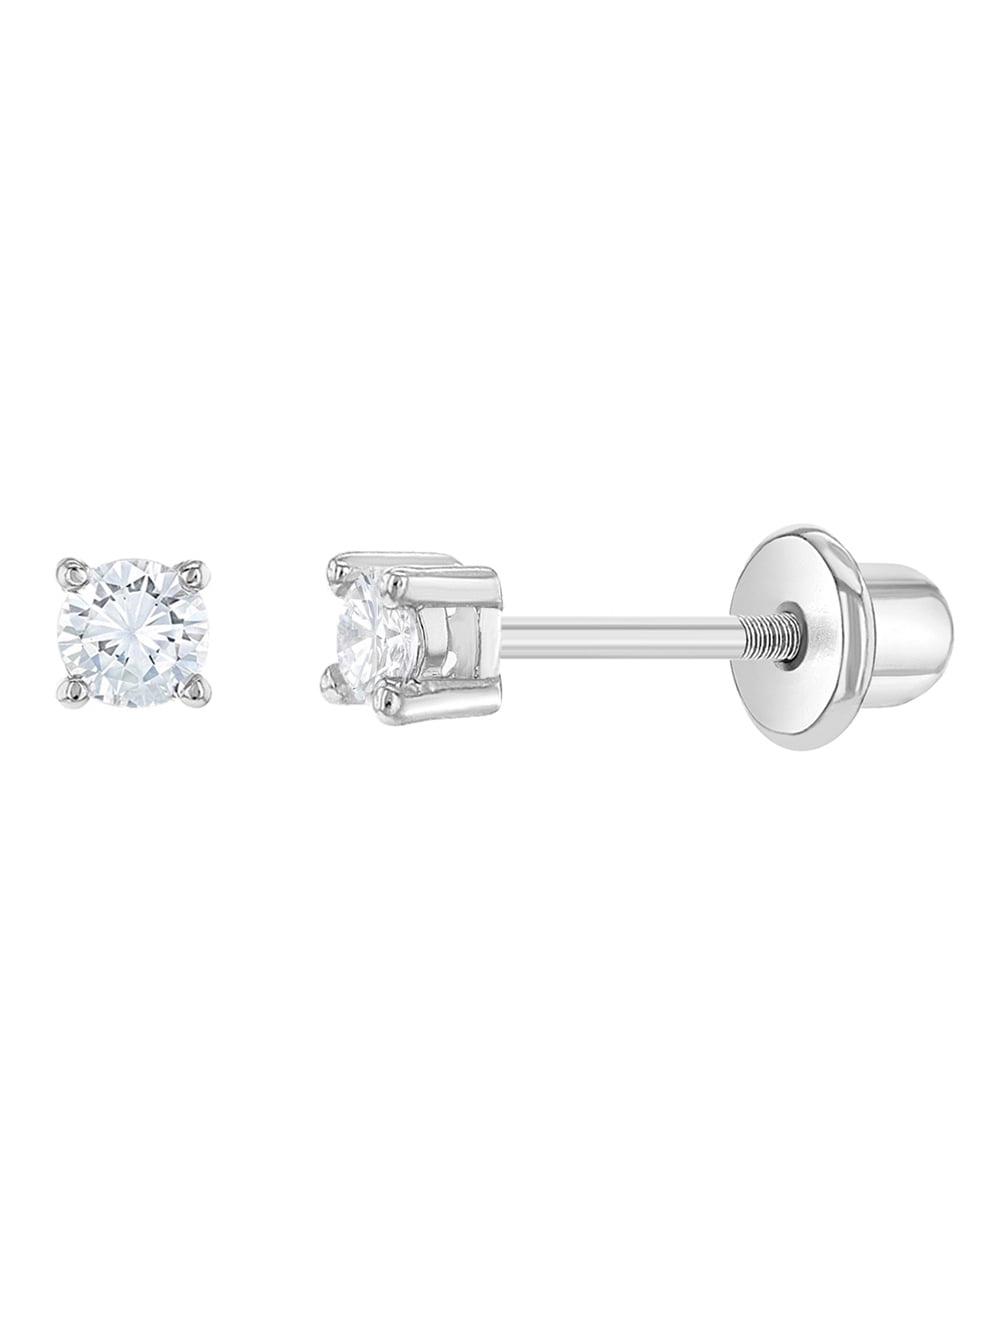 Details about   18k Gold Plated Extra Small Round Clear CZ Screw Back Baby Earrings 2mm 